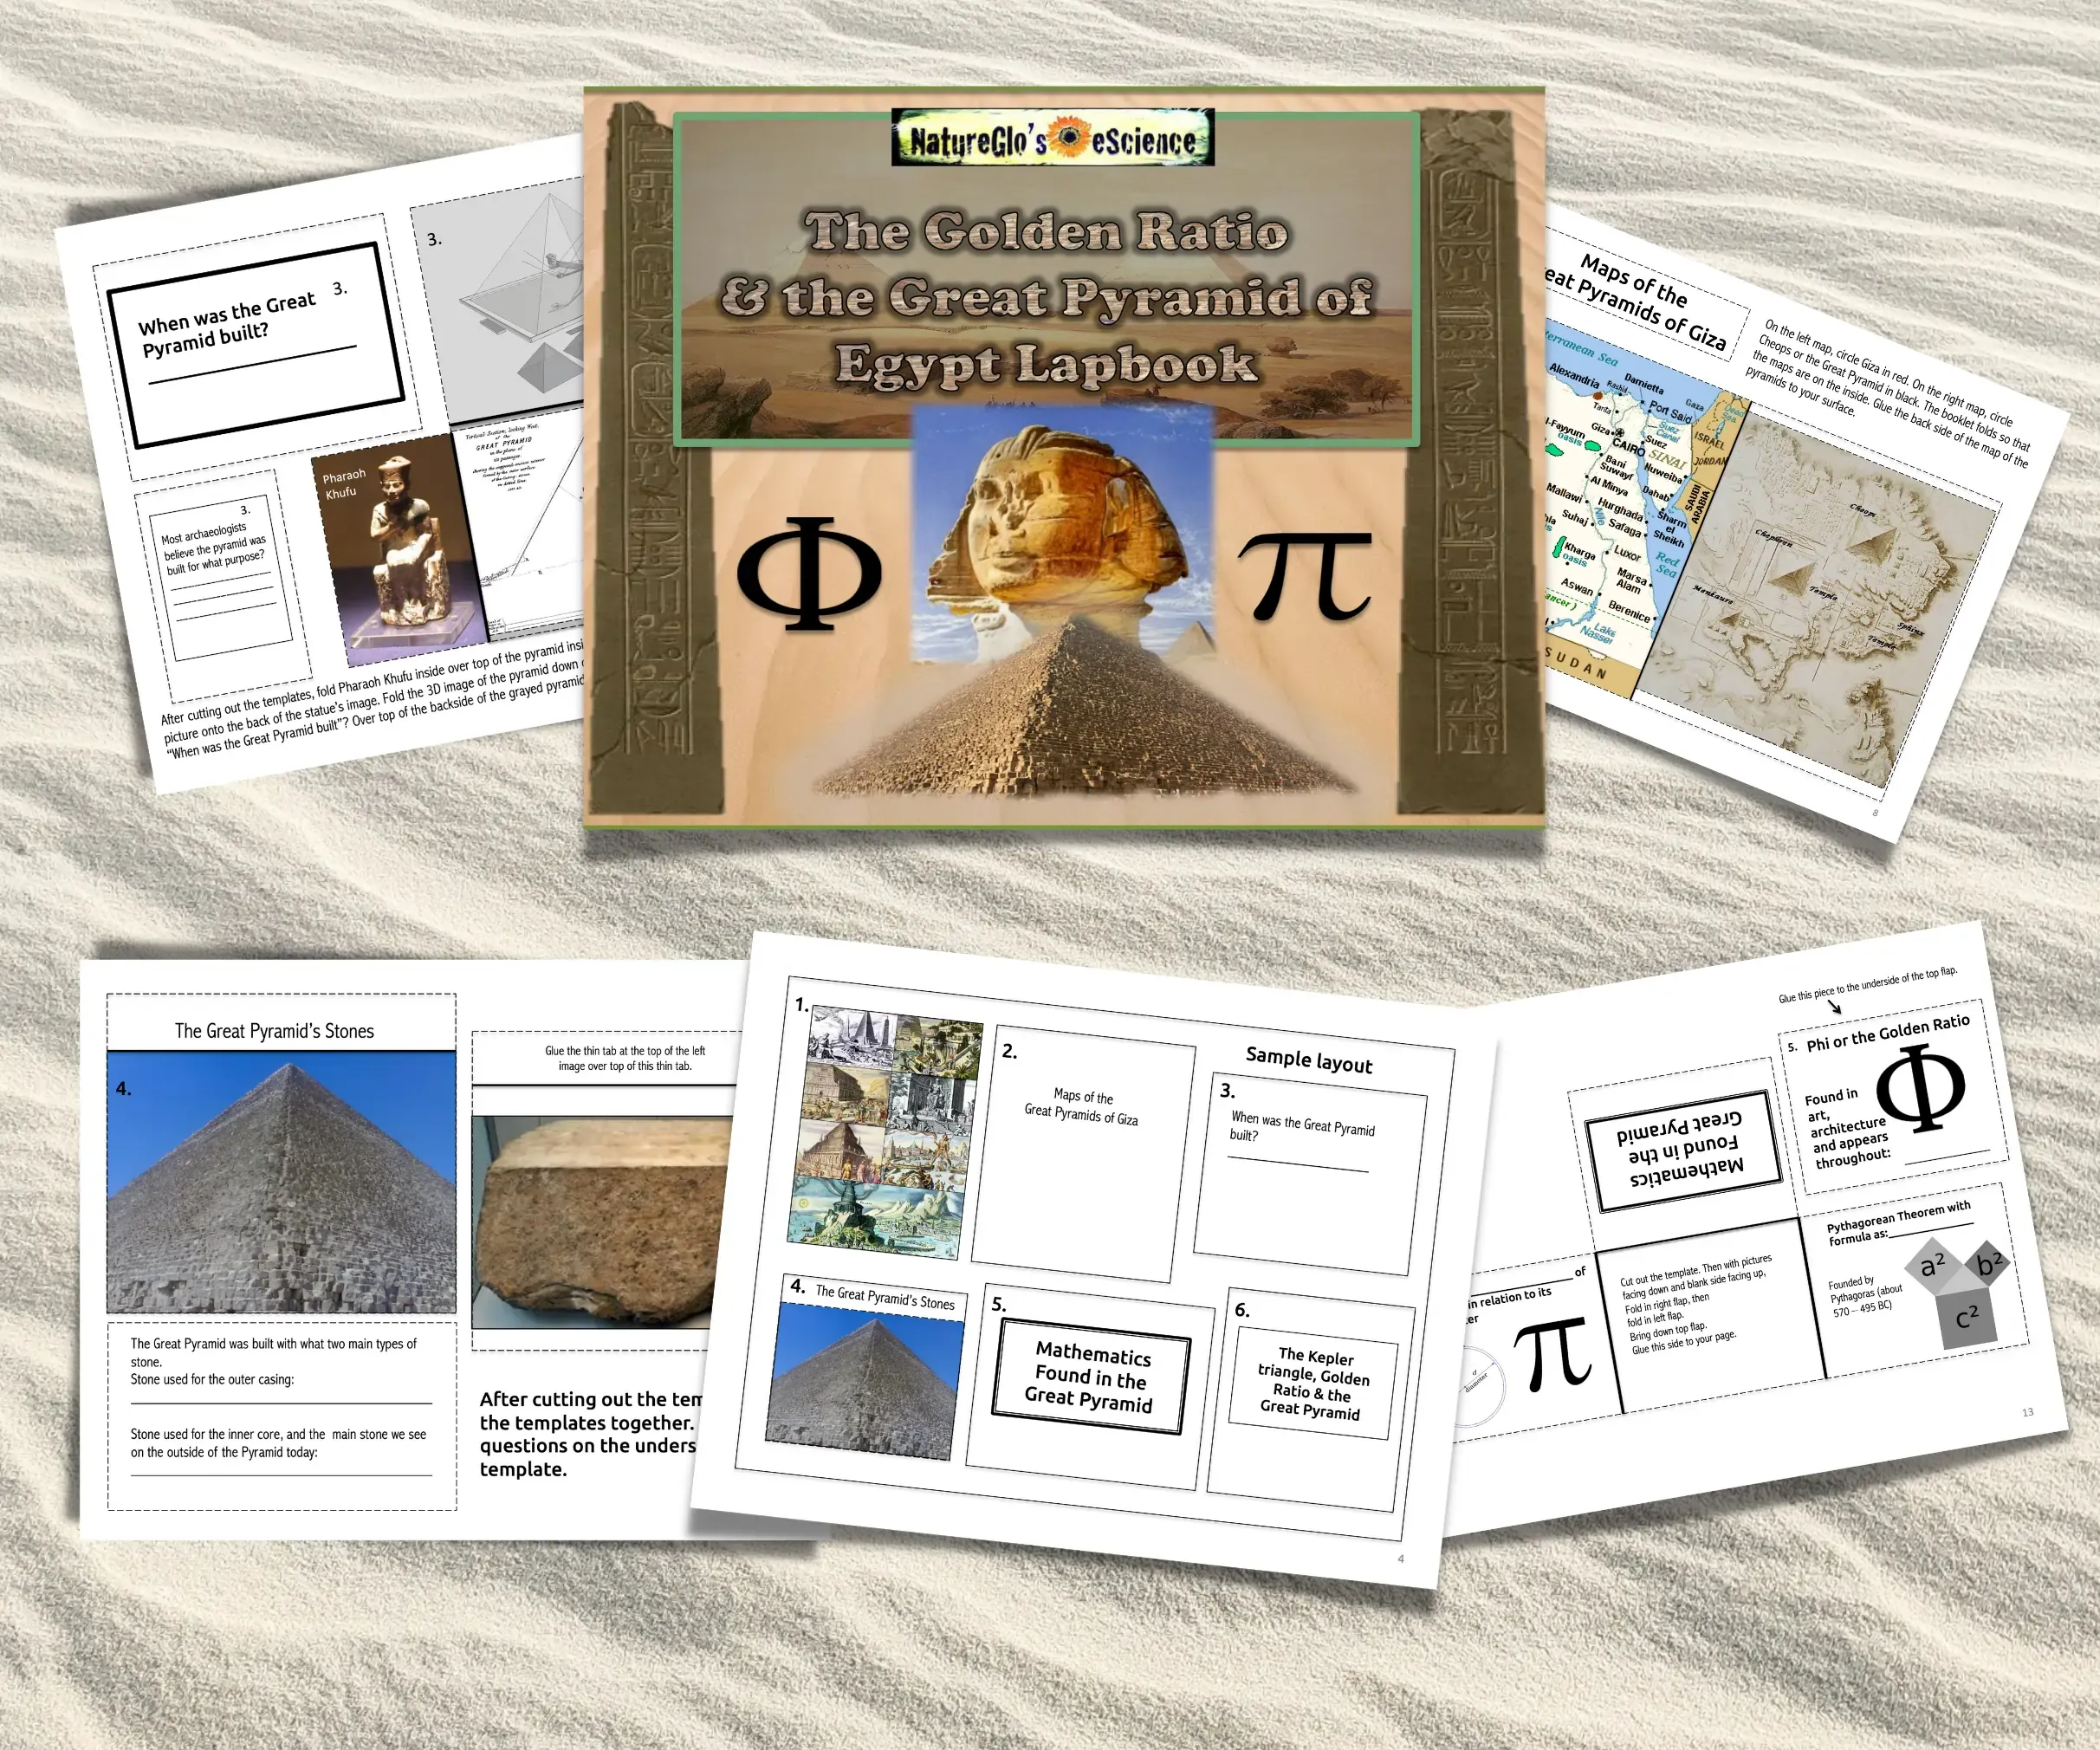 Golden Ratio and the Great Pyramid of Egypt Lapbook